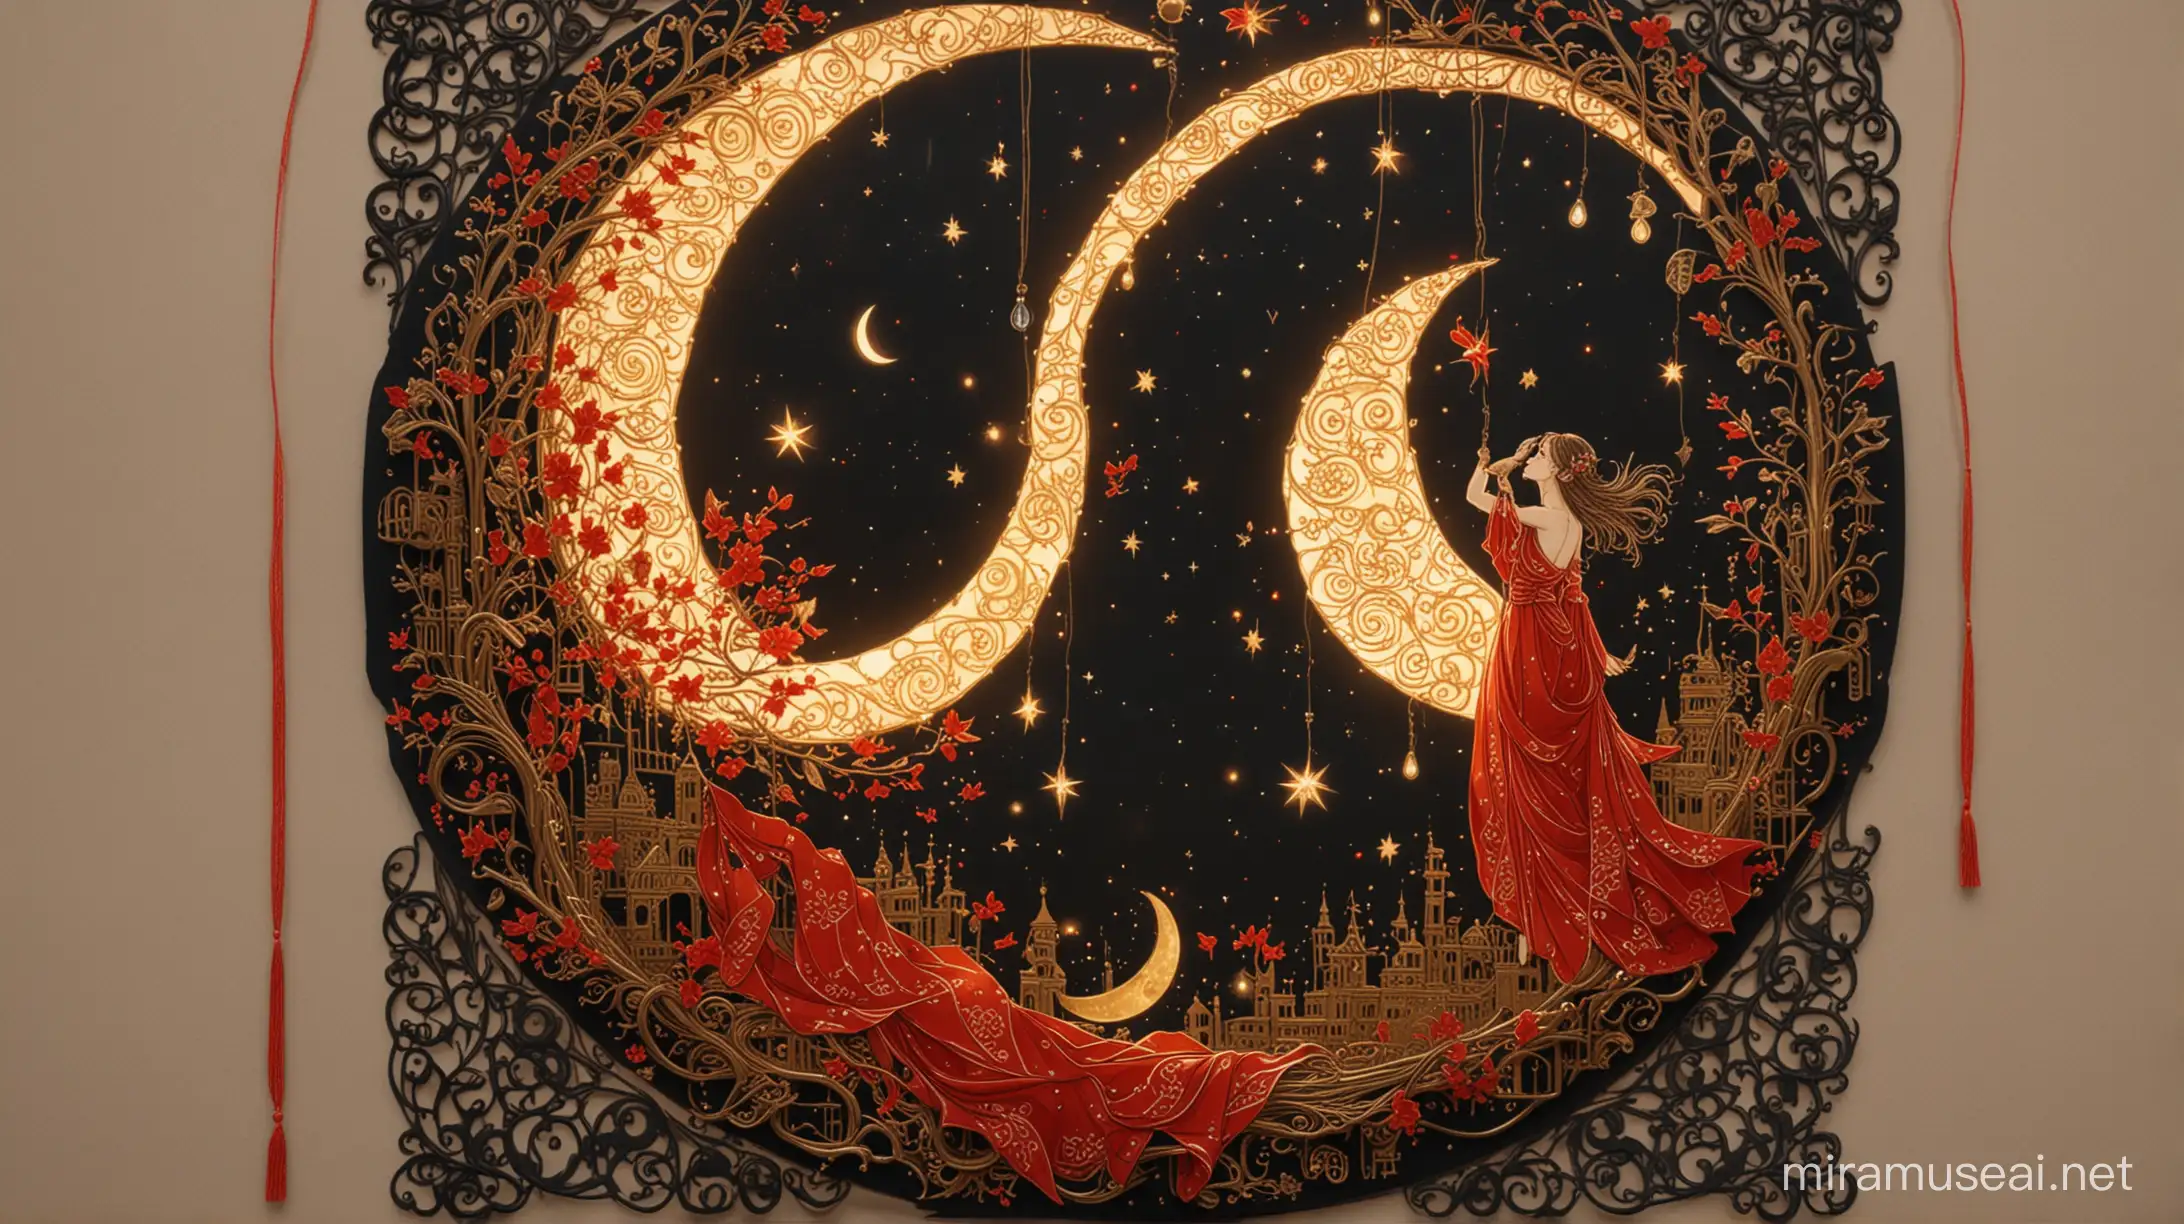 an illustration with girl and an old moon with fairy lights in the style of dark gold molten filigree and red confessional playful and whimsical designs notable sense of movement can't believe how beautiful this is highangle hanging scroll ar Image
